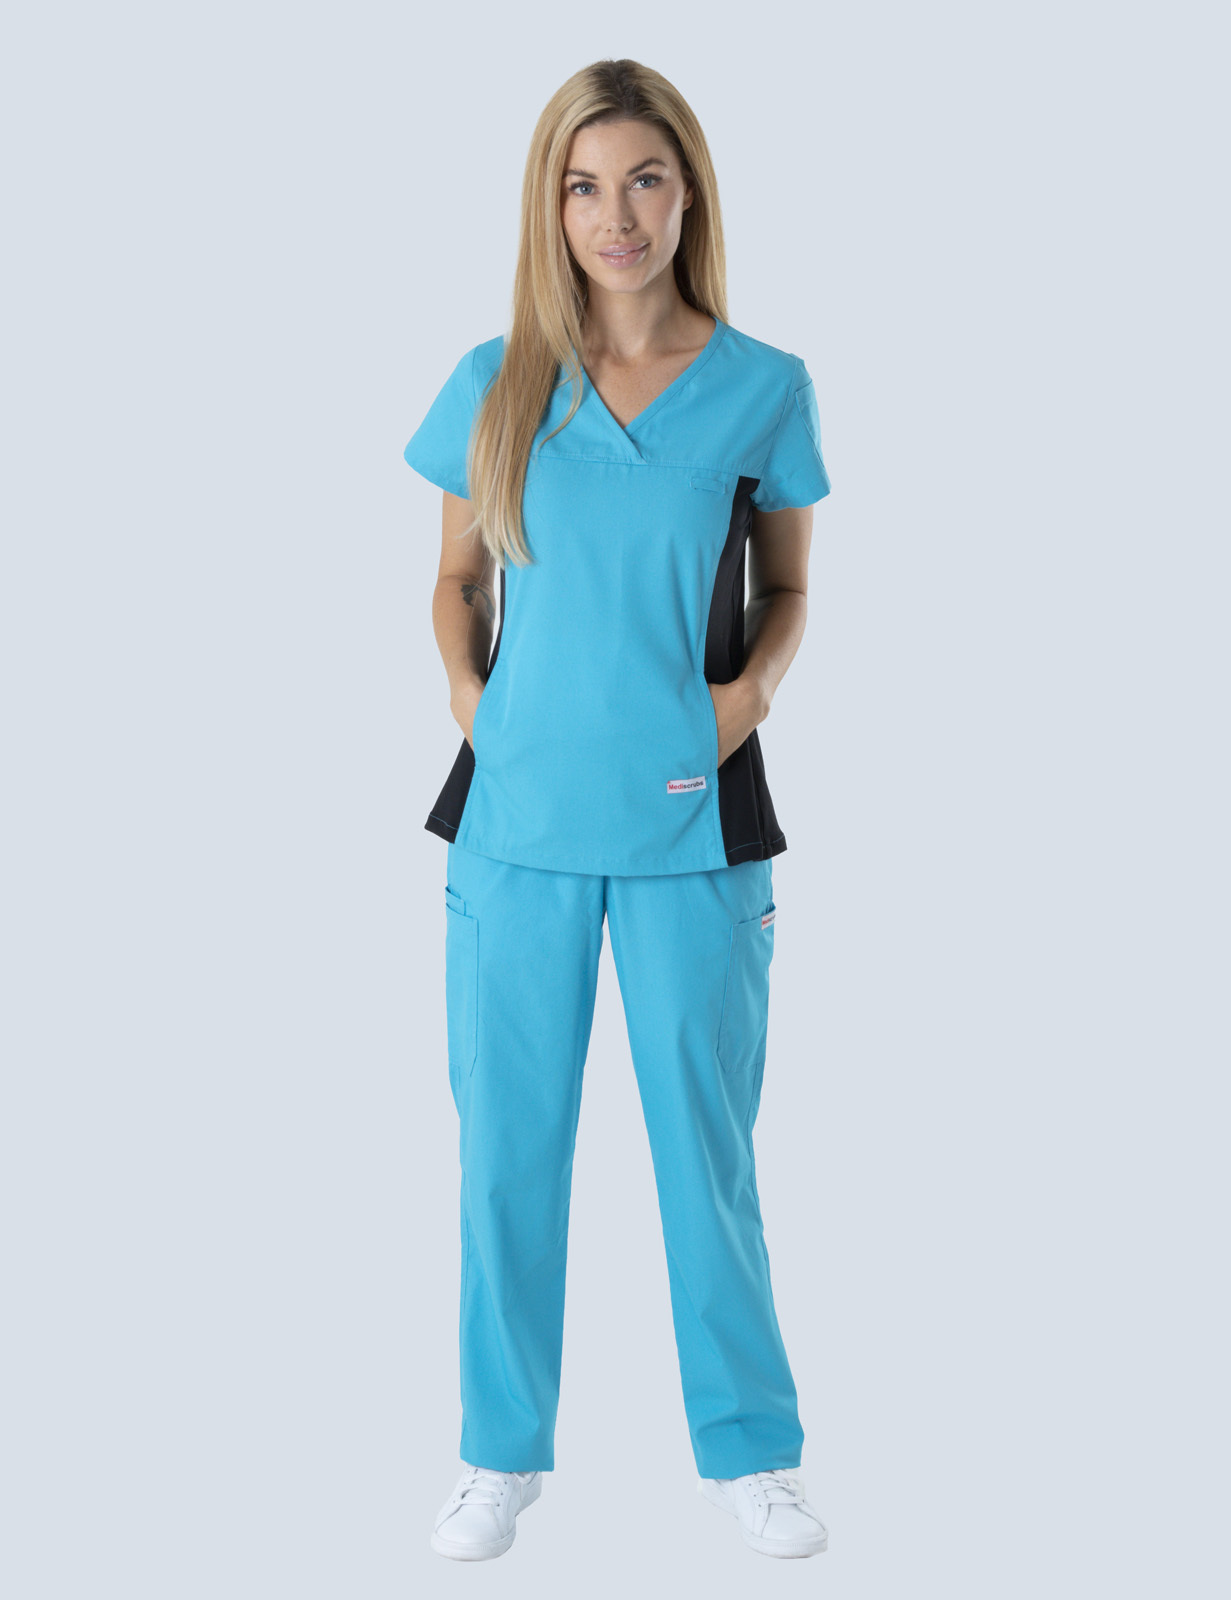 Women's Fit Solid Scrub Top With Spandex Panel - Aqua - Large